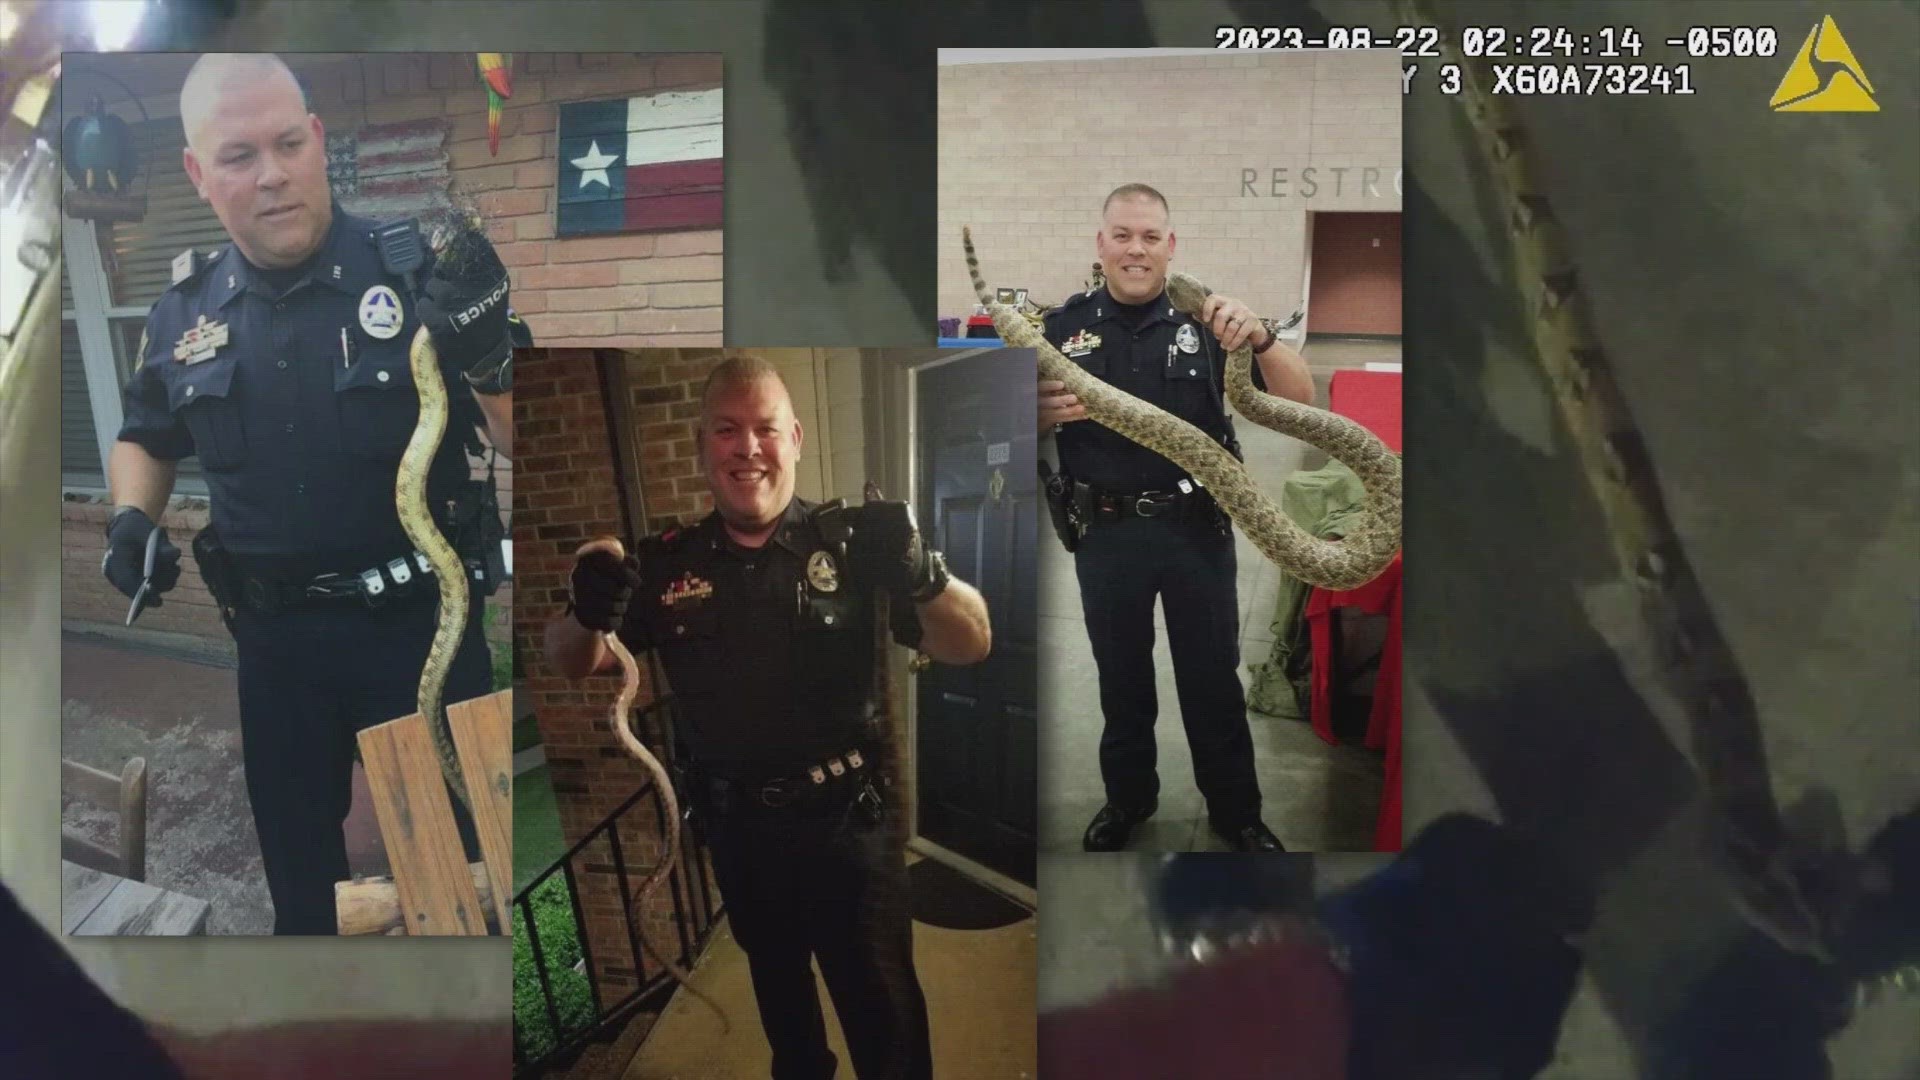 In August, Officer Burres was dispatched to an apartment complex for a "four-foot python." It would end up being an eight-foot red tail boa named "Bonnie".